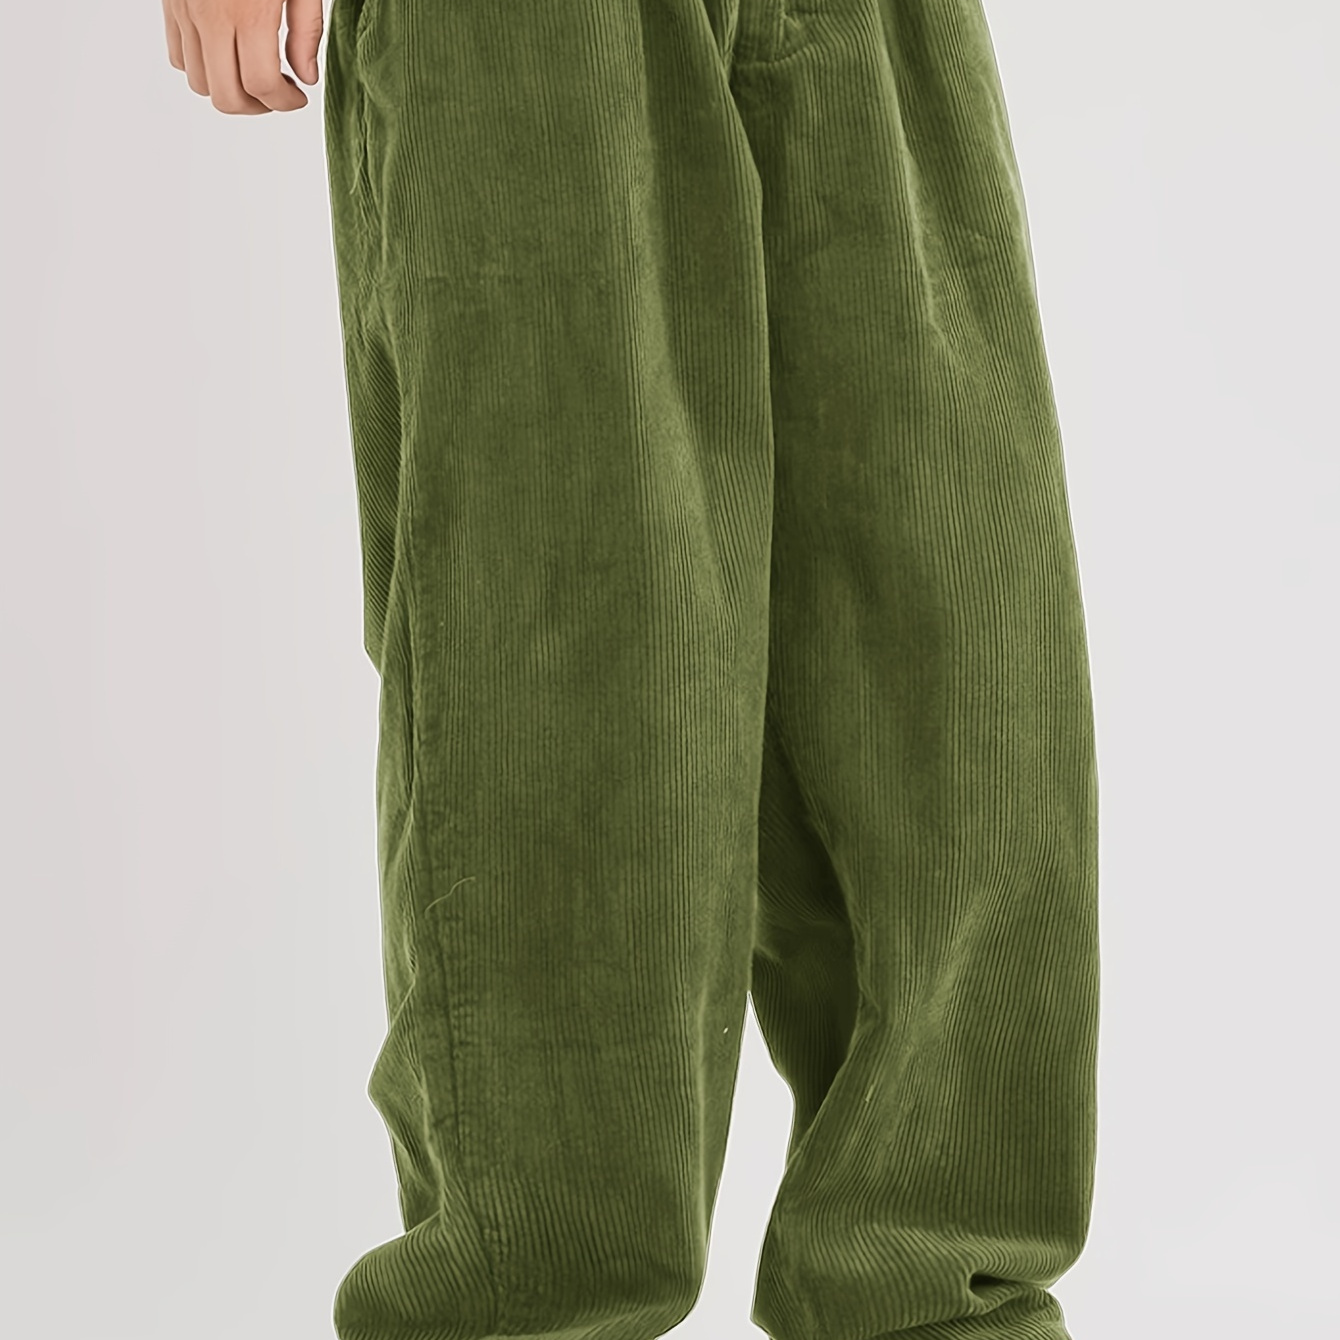 

Men's Basic Style Corduroy Straight-leg Pants, Solid Color Trousers With Pockets For Casual Daily Wear